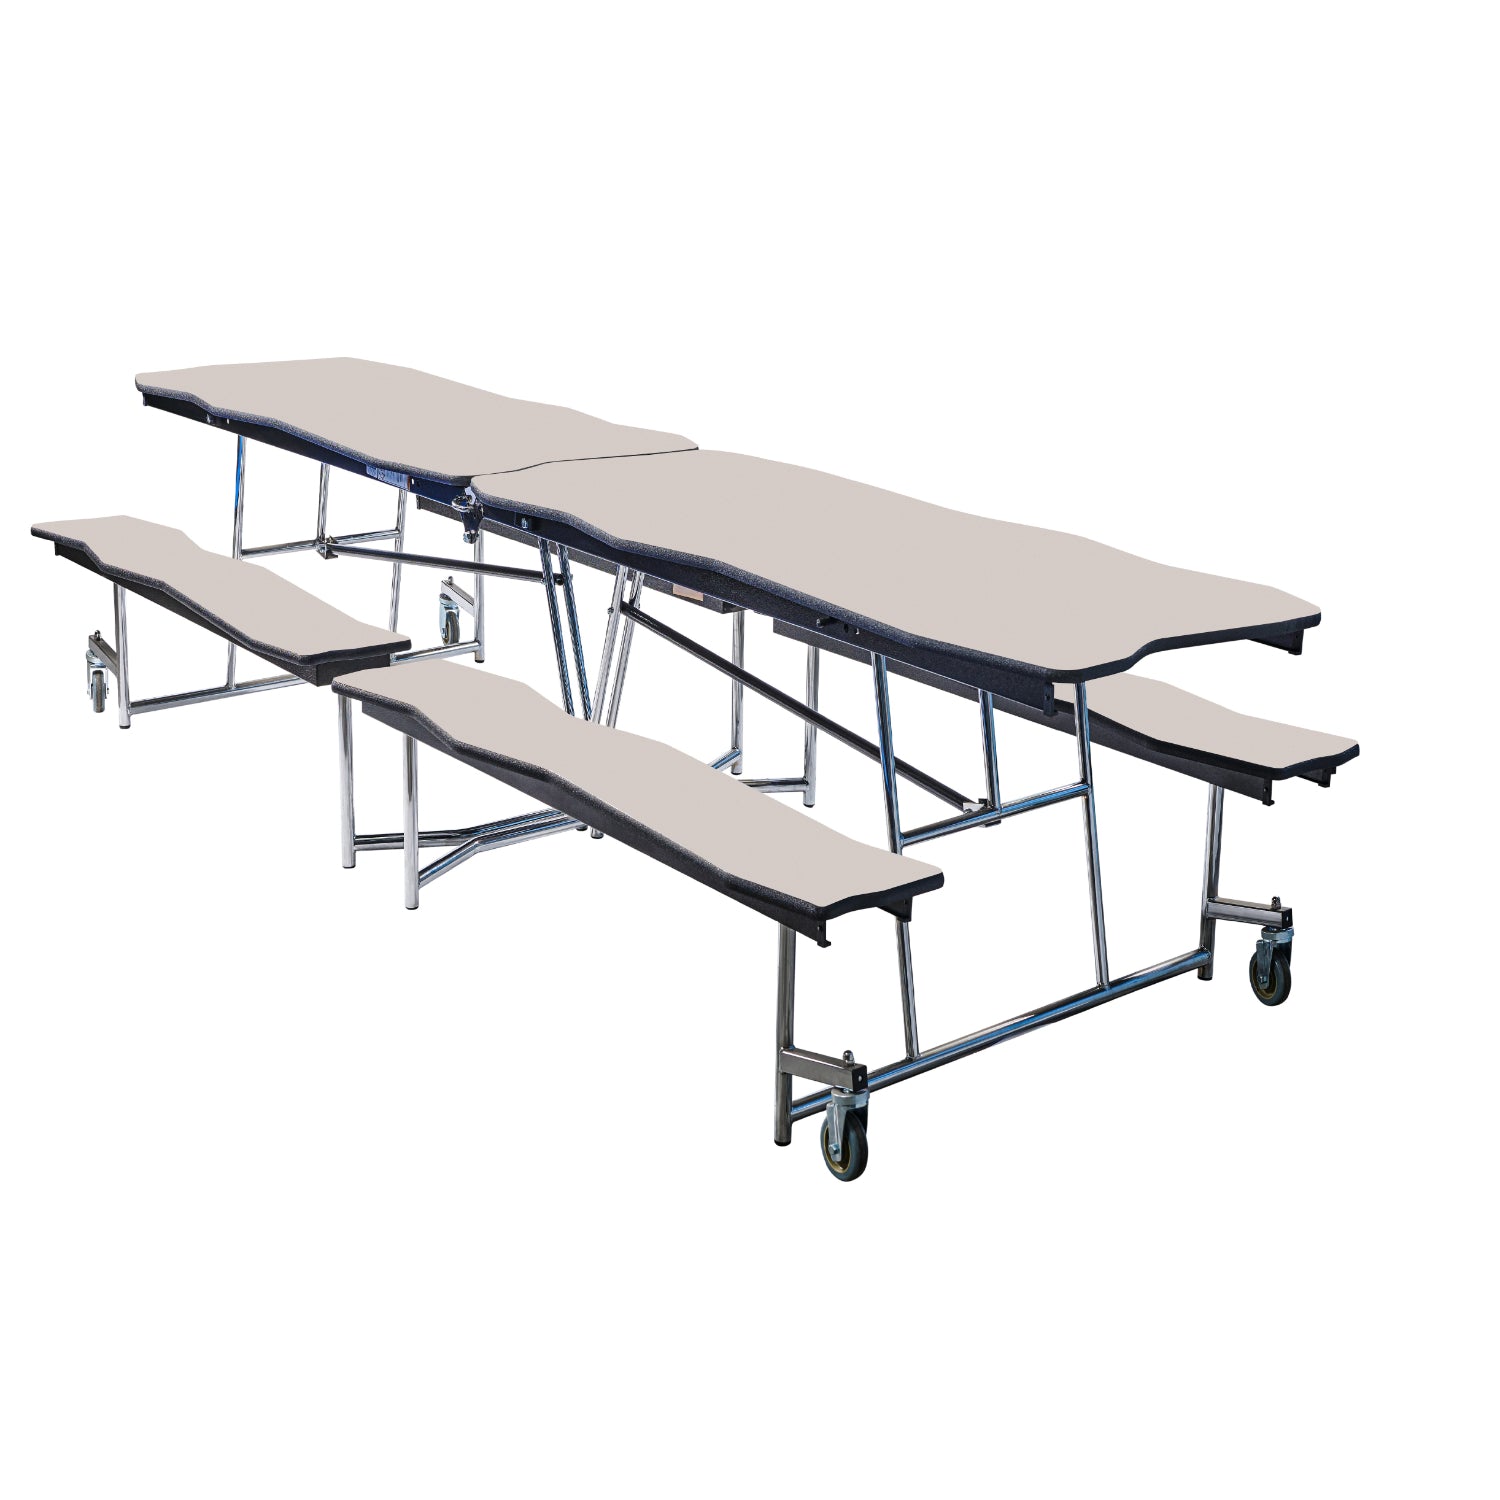 Mobile Cafeteria Table with Benches, 8' Bedrock, Particleboard Core, Vinyl T-Mold Edge, Chrome Frame